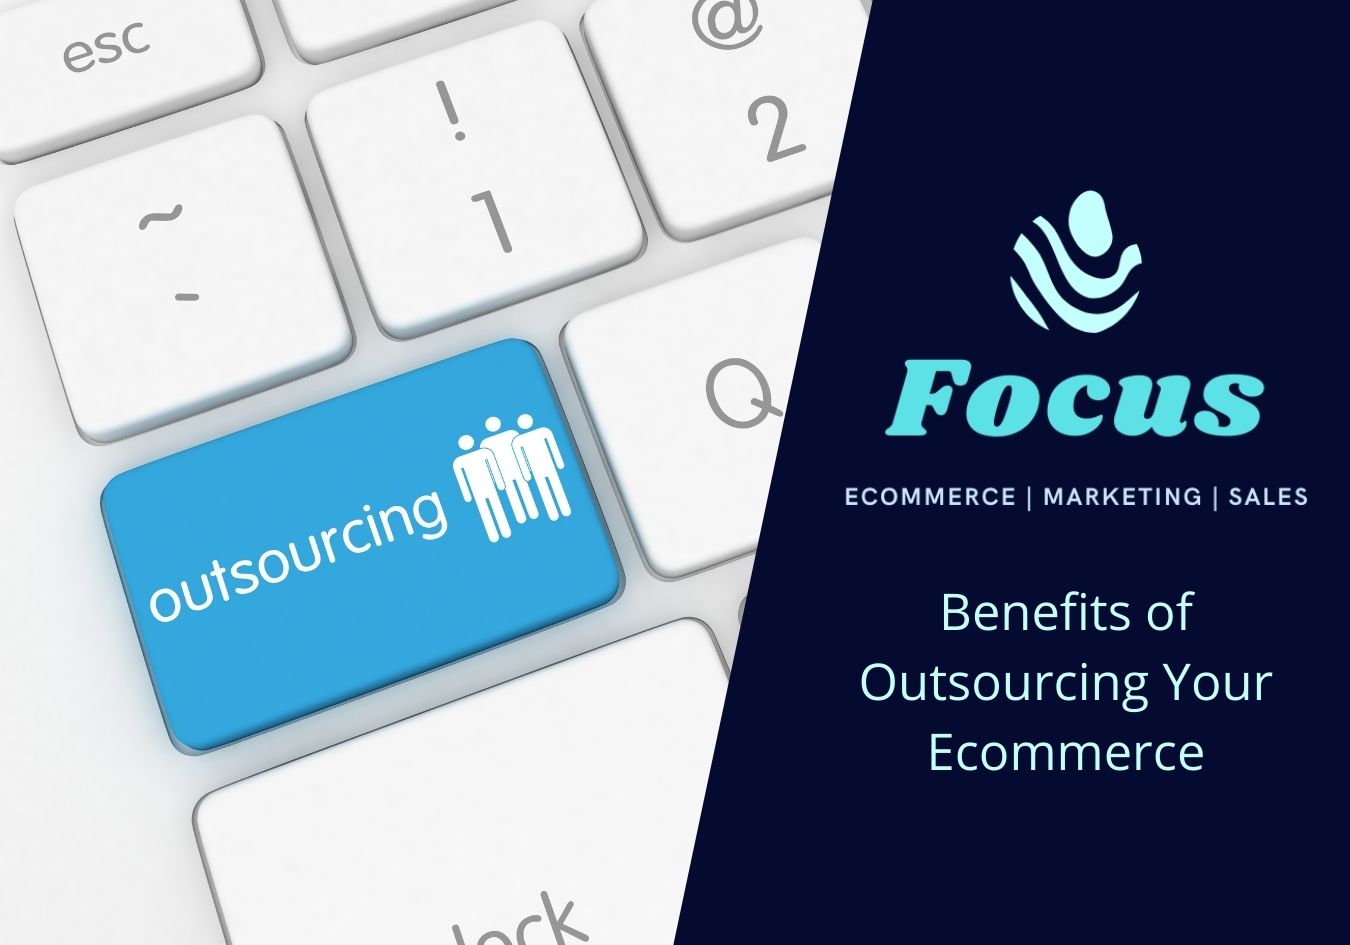 Benefits of Outsourcing Your Ecommerce